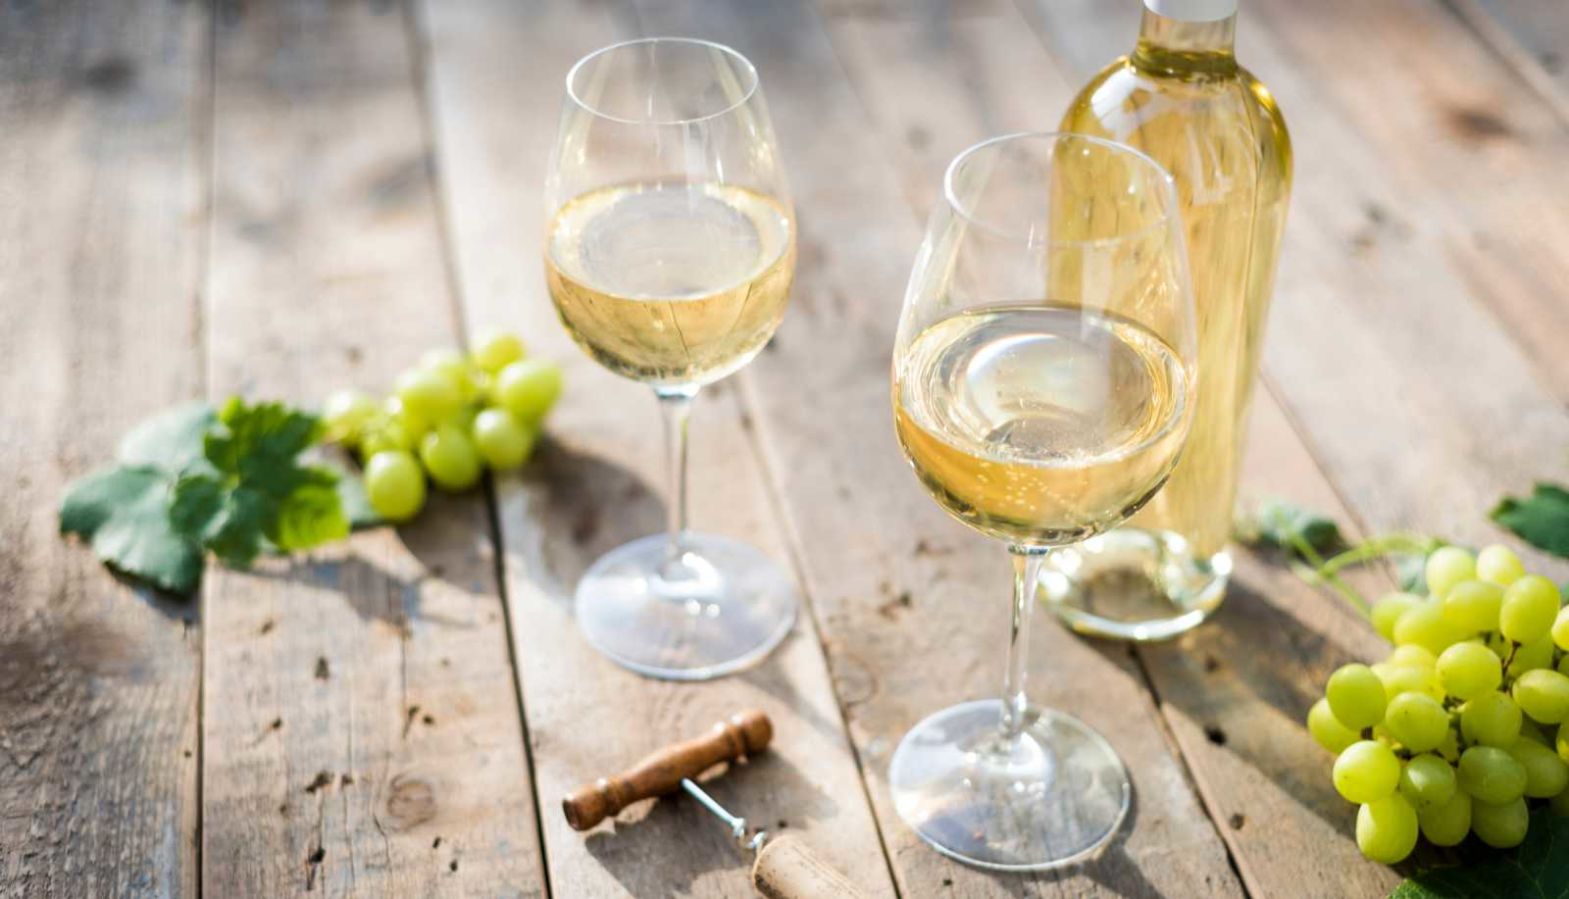 A bottle of white wine and two glasses on a wooden table - types of white wine